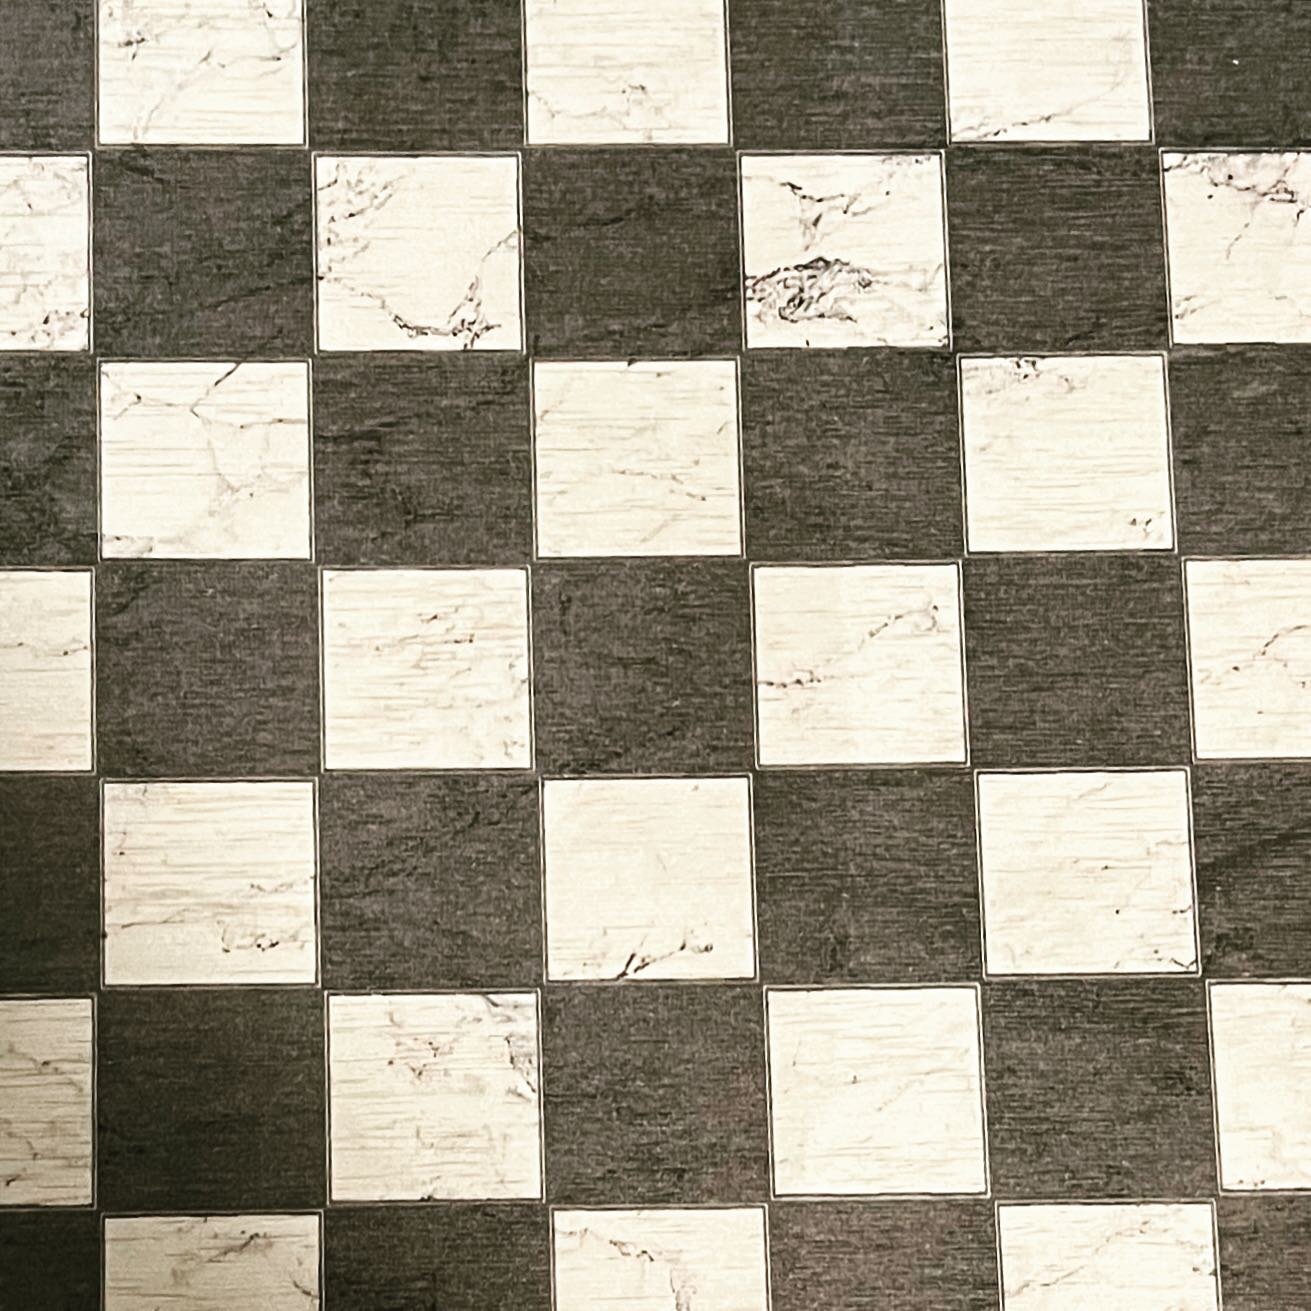 I like checkers. #checkers #design #synchronicity